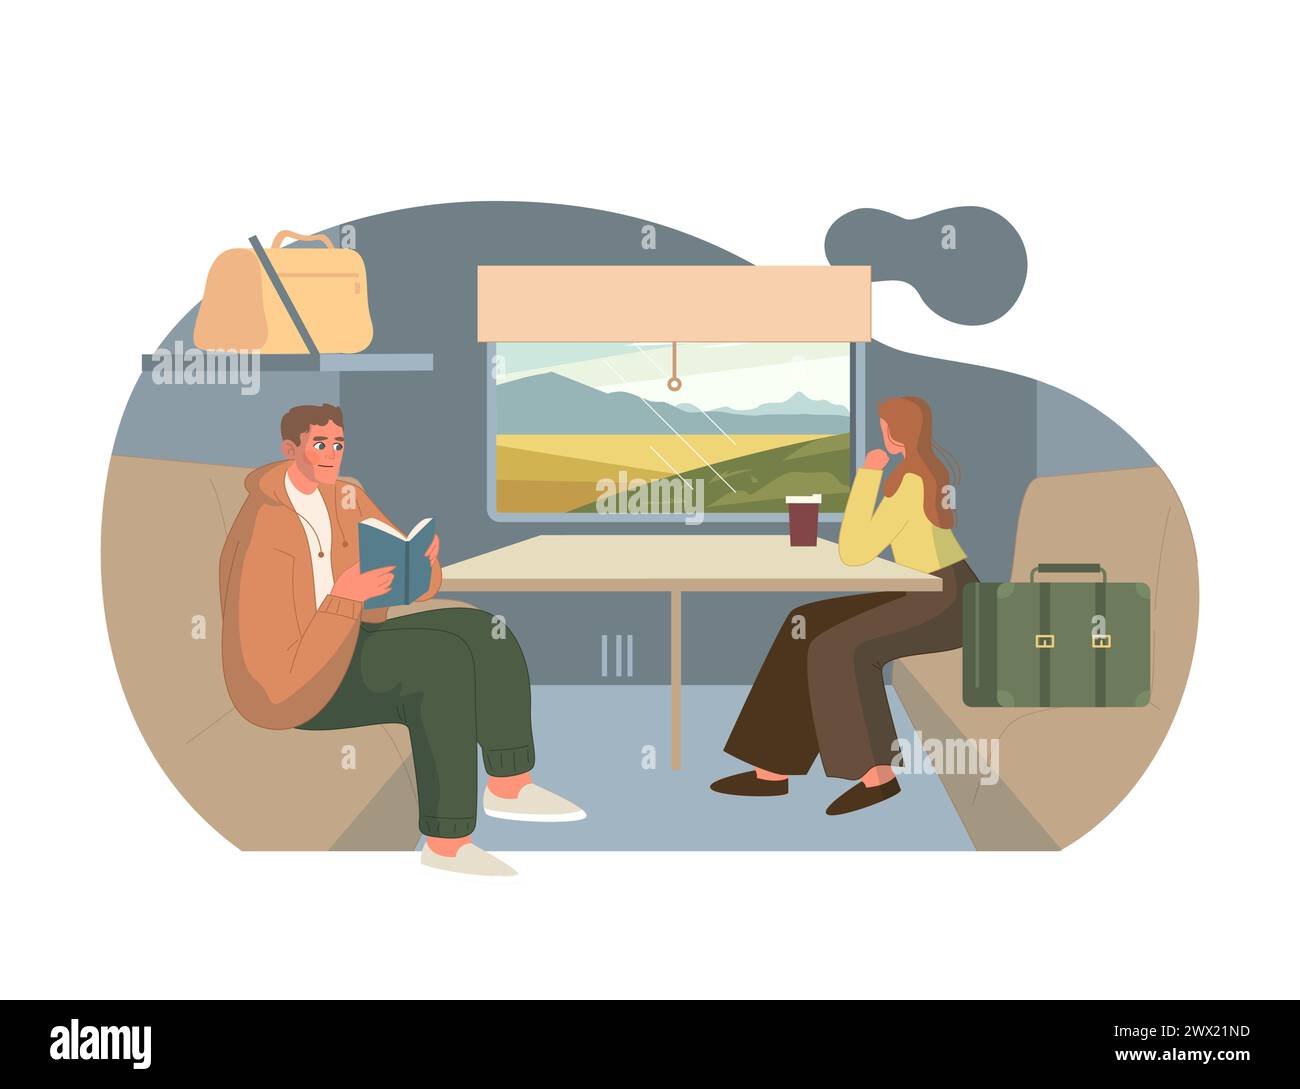 Relaxed Travel by Train. Passengers engrossed in books and contemplation, traveling in comfort with scenic views from a train window. Stock Vector